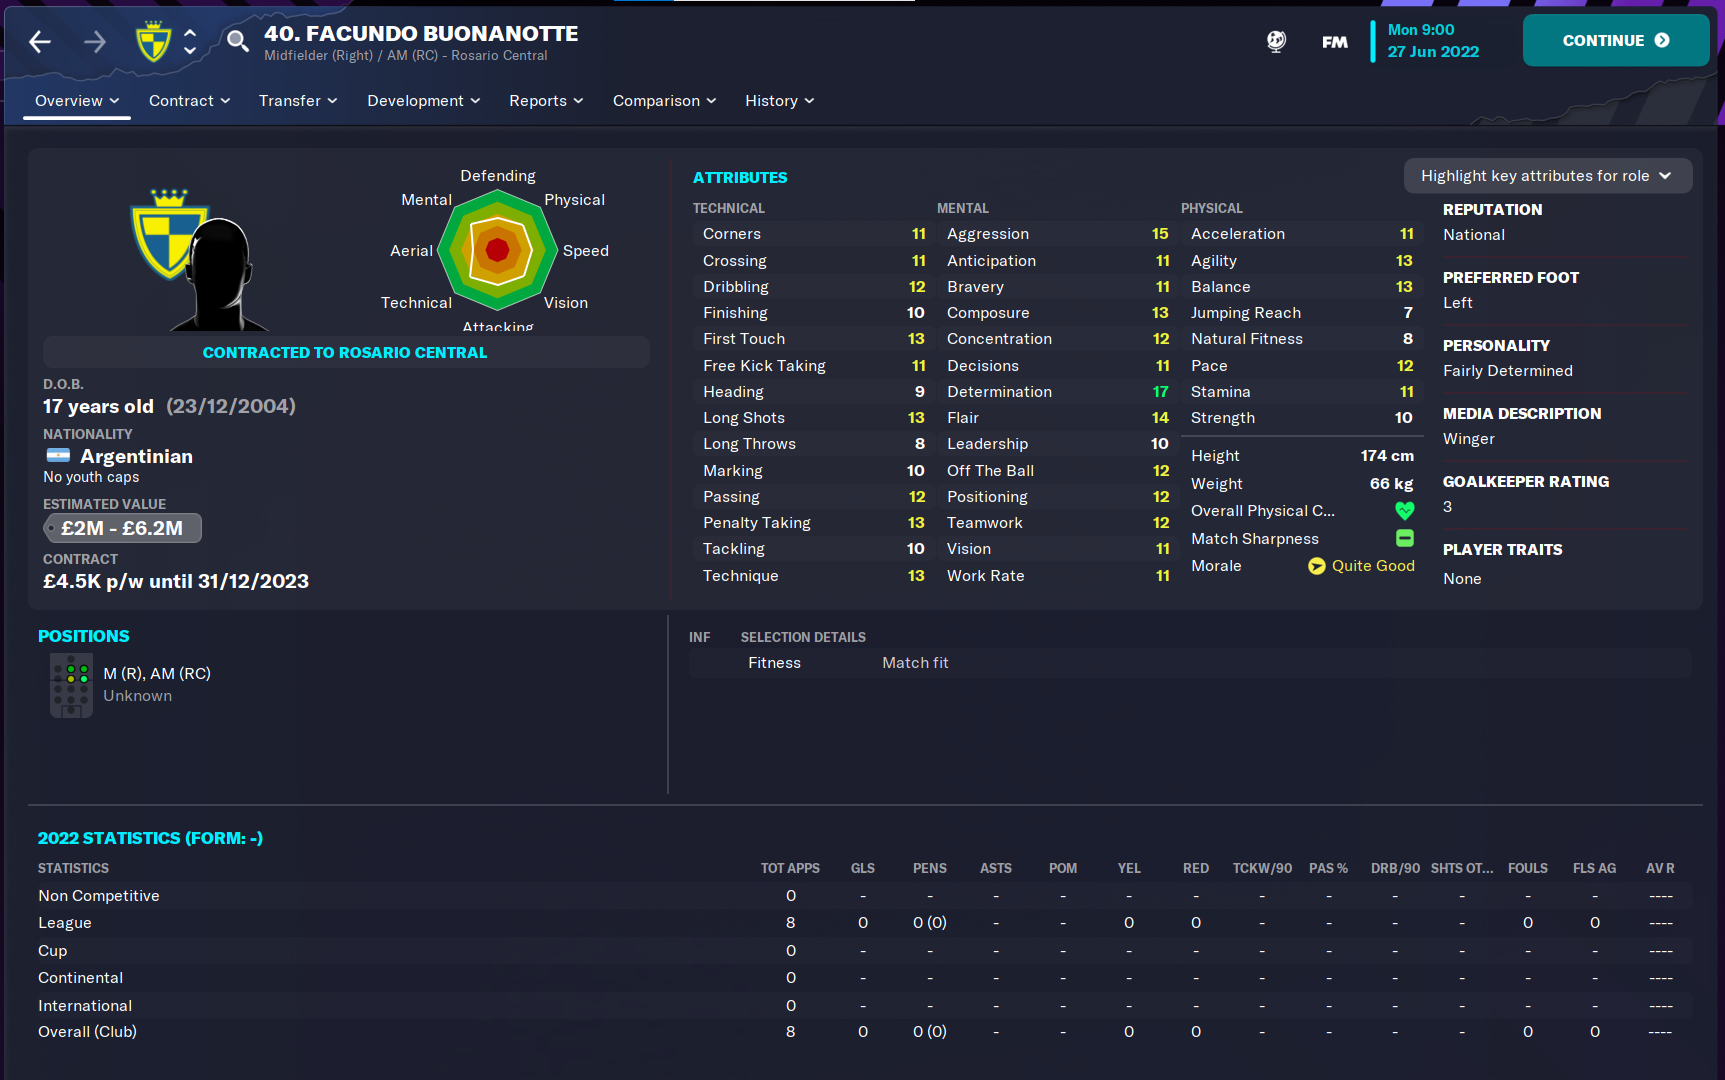 The MOST LIKELY TO SUCCEED Wonderkids in Football Manager 2023